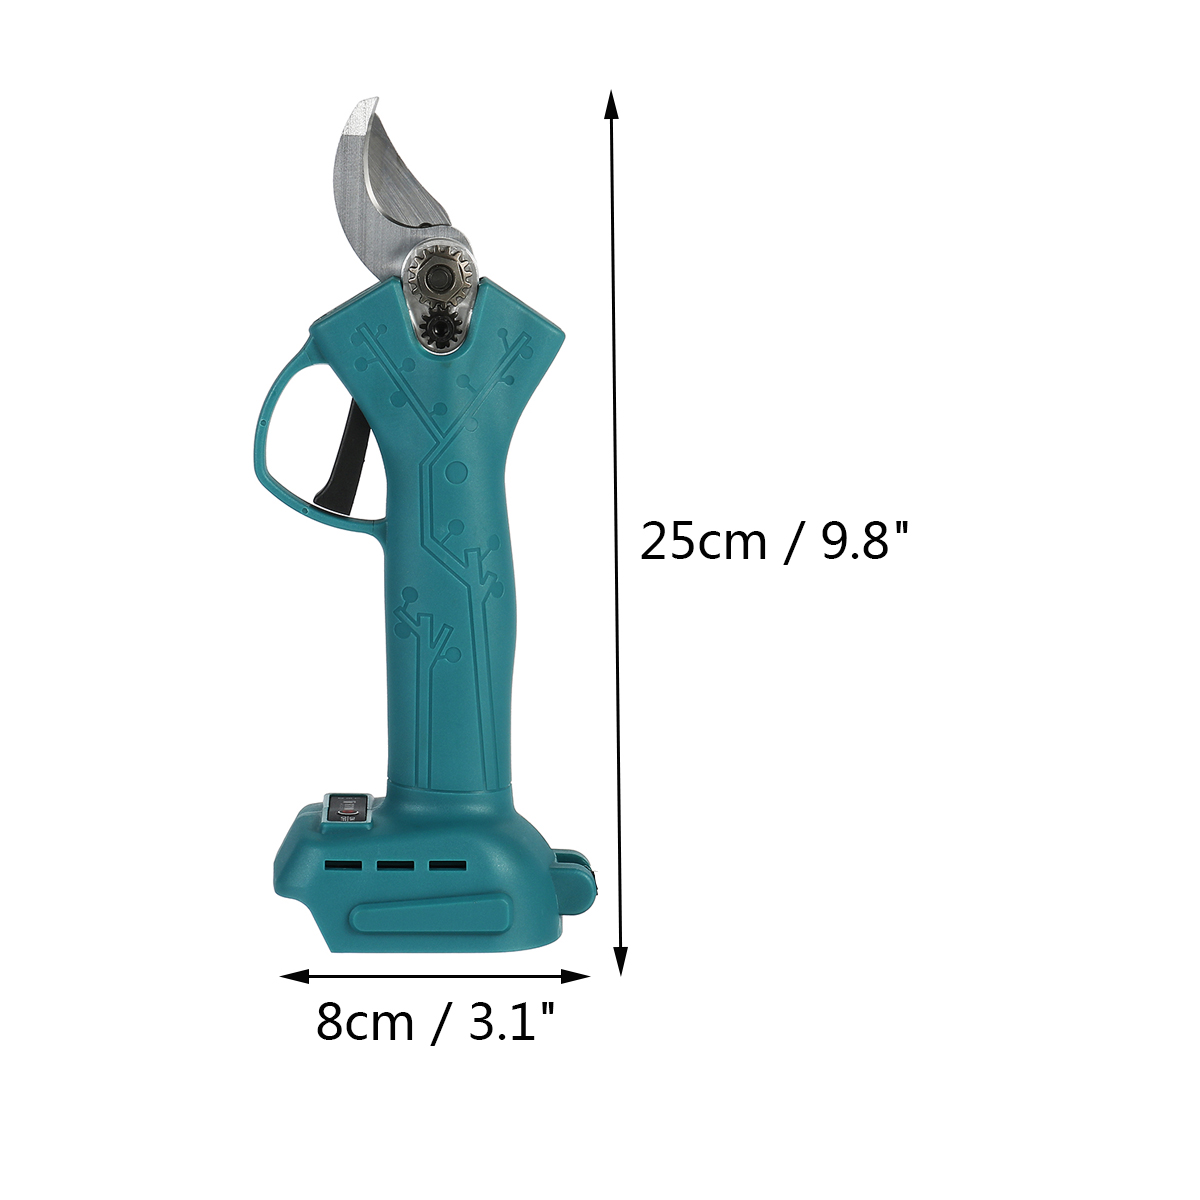 2530mm-Cordless-Electric-Branch-Scissors-Shear-Pruning-Cutter-Tool-Trimmer-For-WorxMakita-18V-21V-Ba-1816478-11